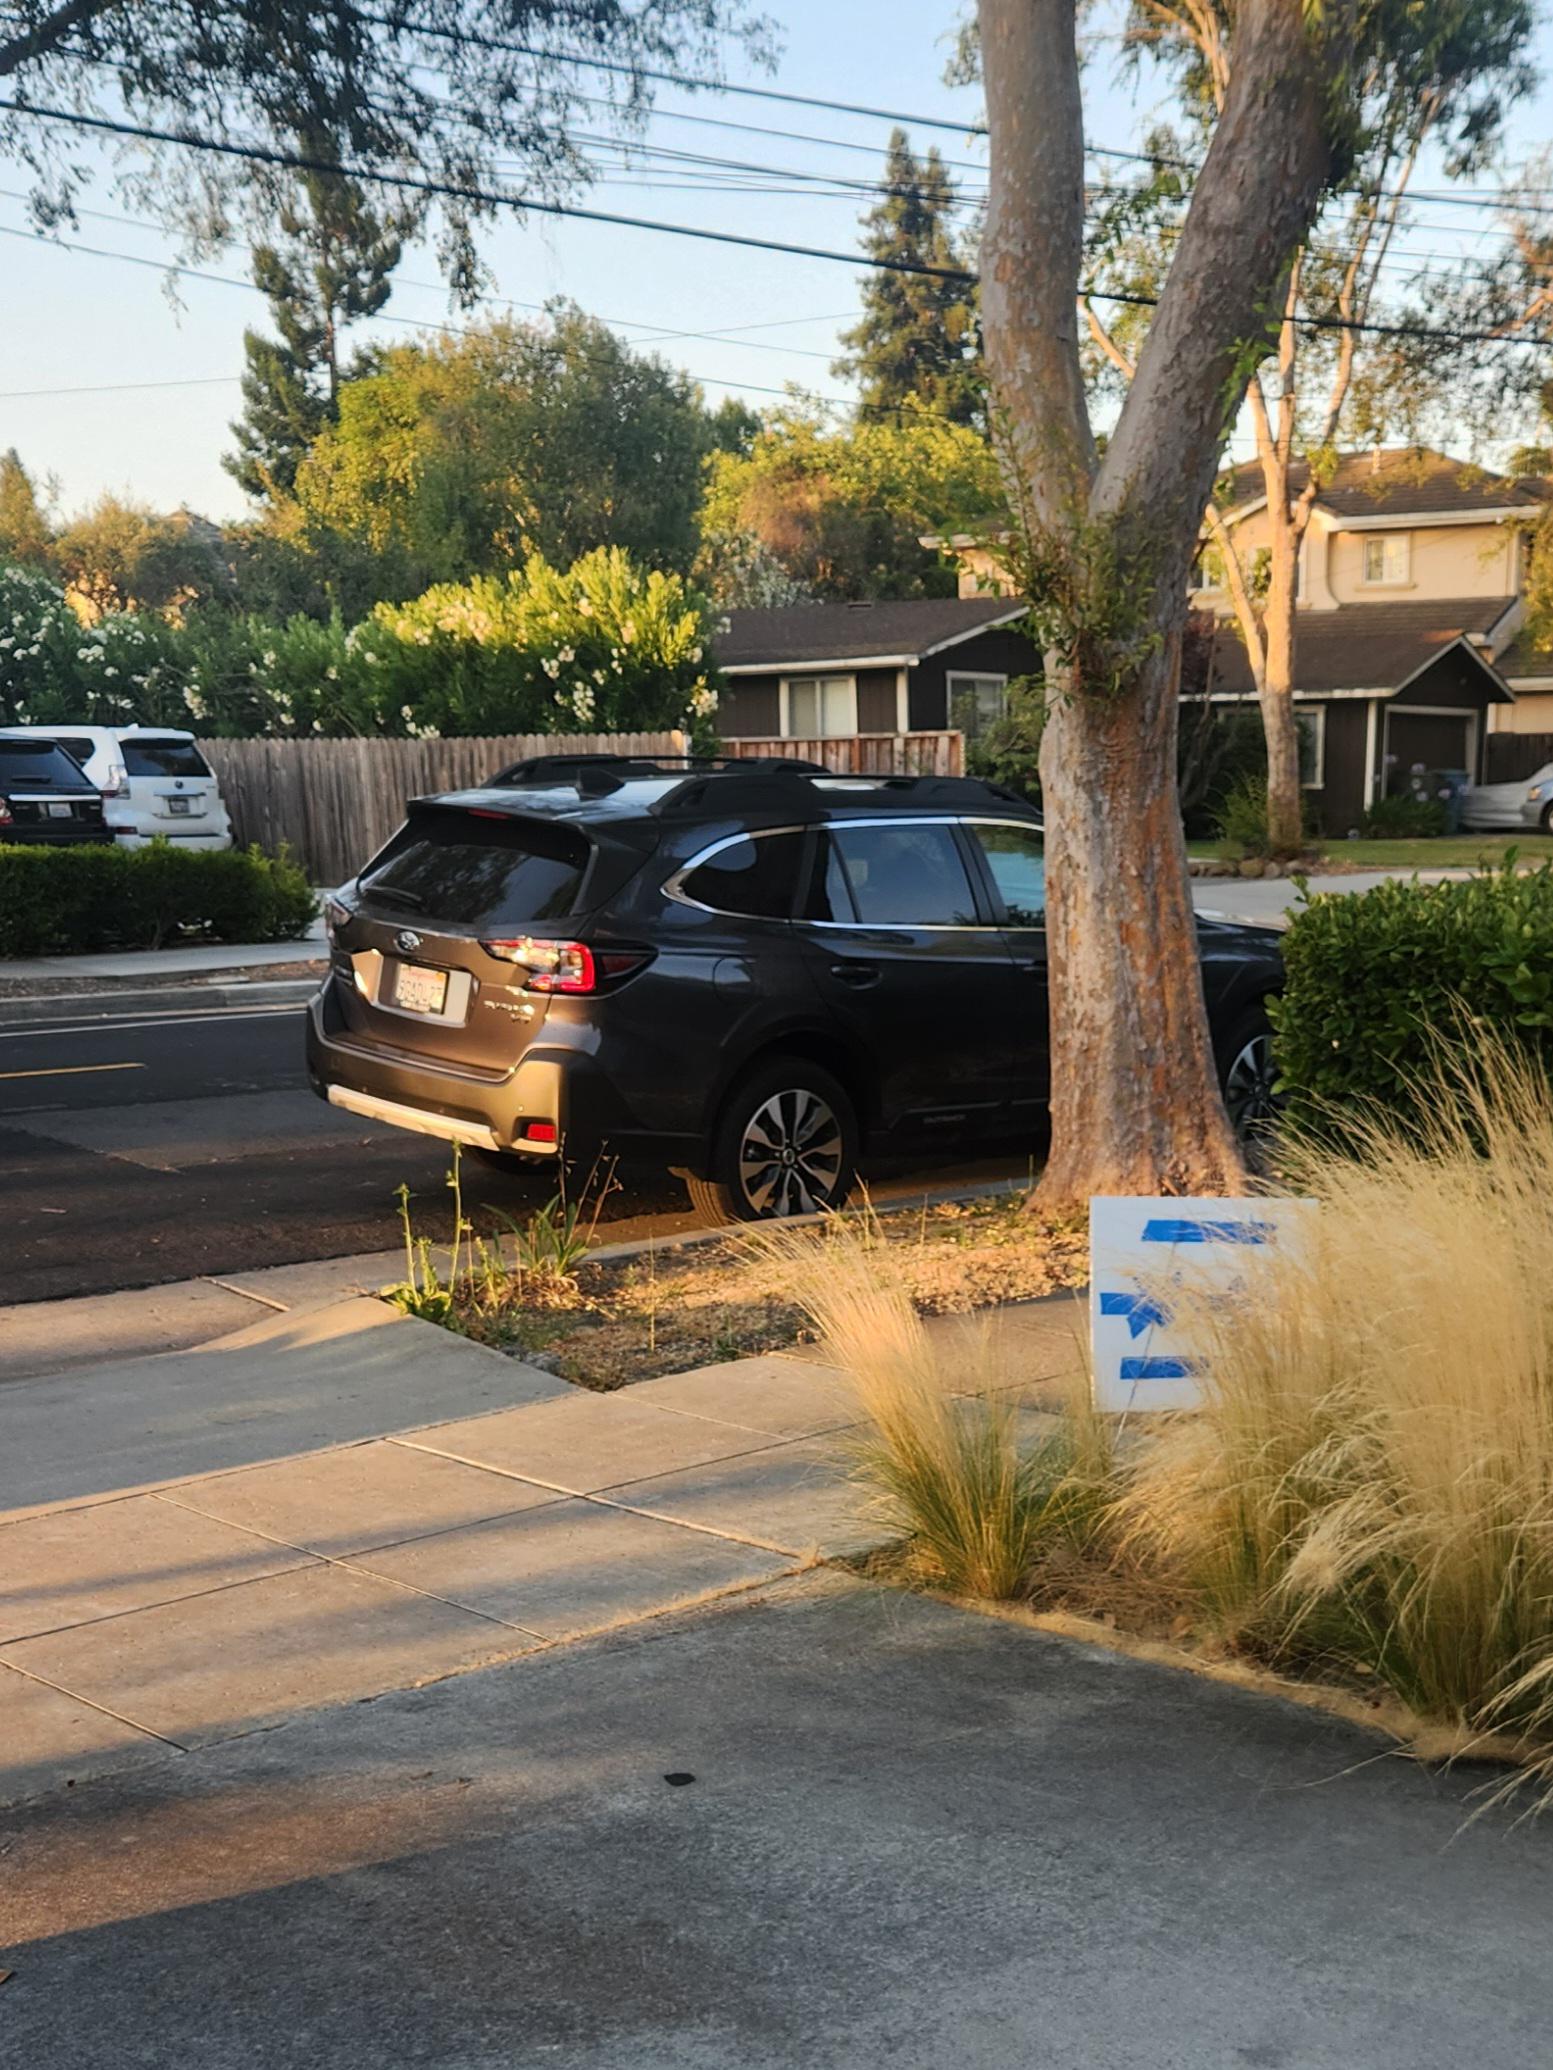 r/mildlyinfuriating - Moved into a house, literally the only thing my neighbor has said is, "don't park in front of my house." Guess whose car that is parked in front of my house.